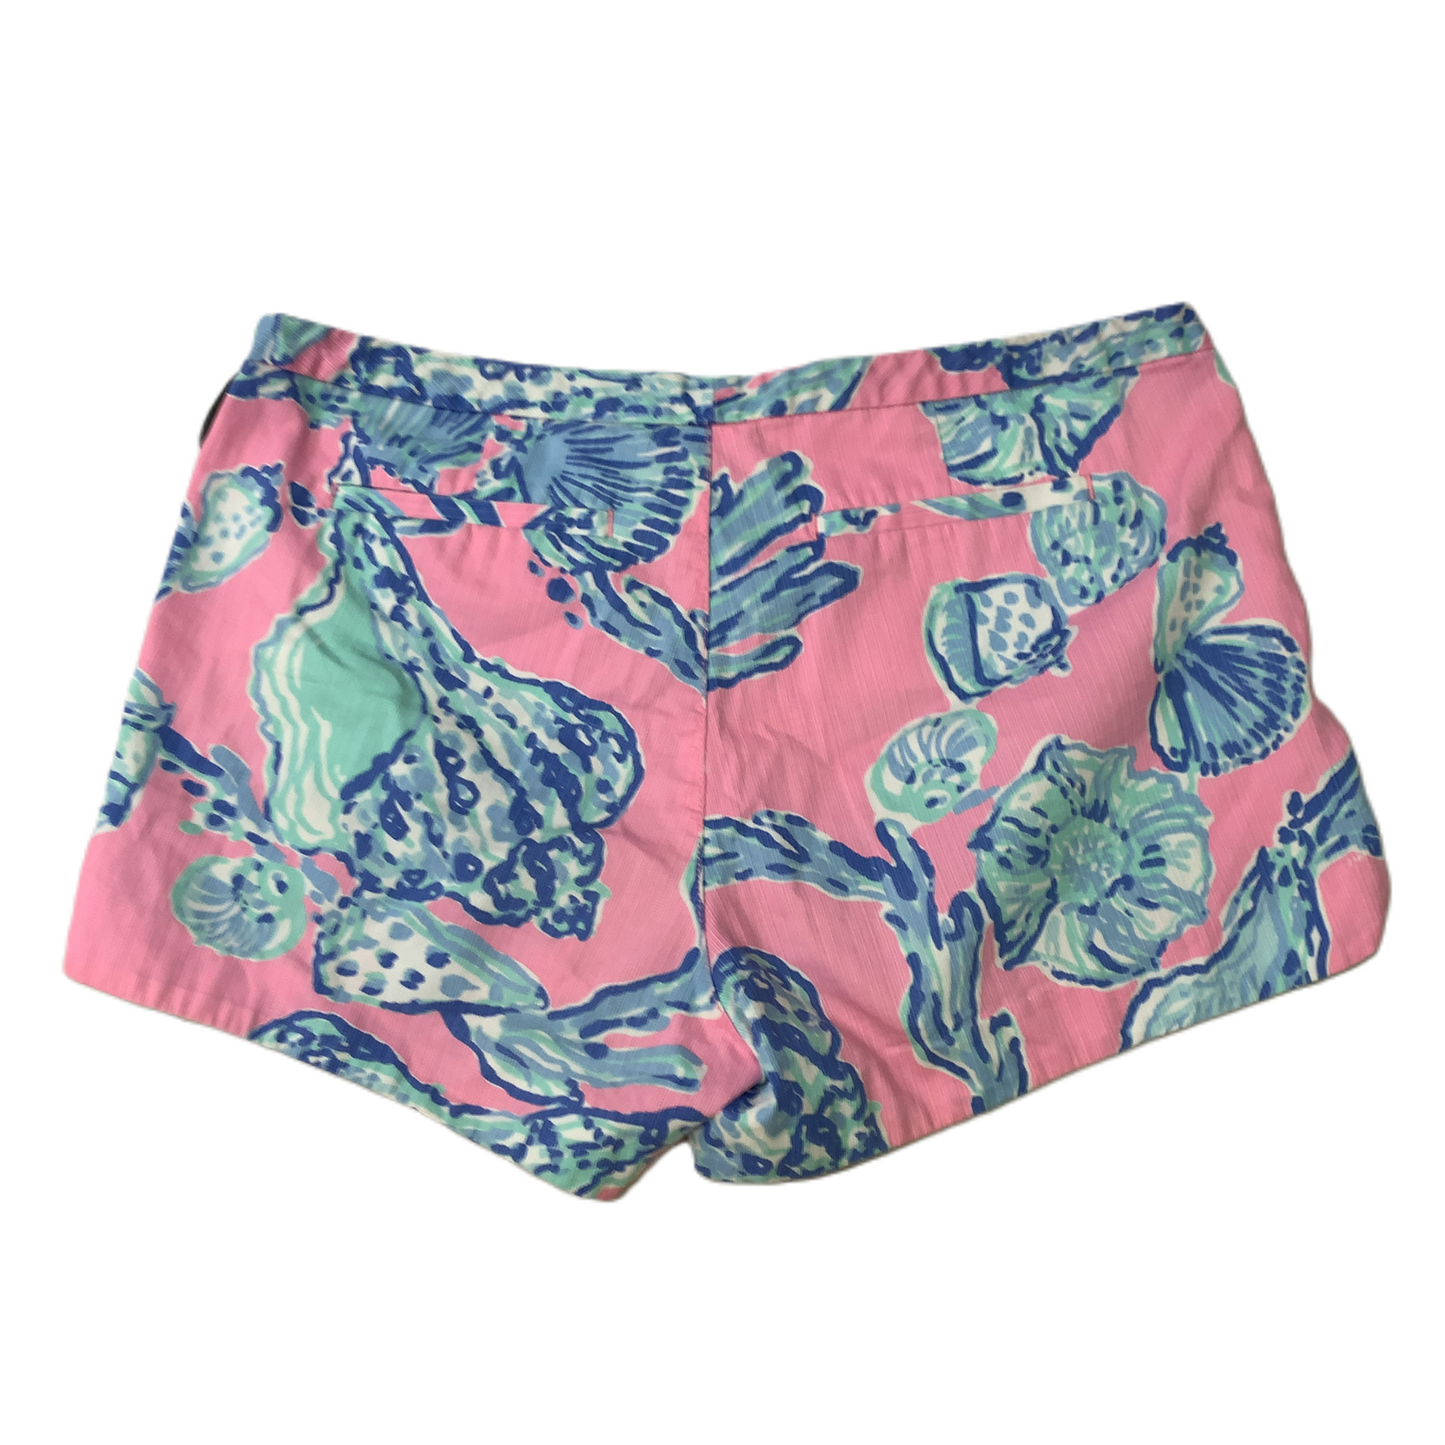 Blue & Pink  Shorts Designer By Lilly Pulitzer  Size: 10